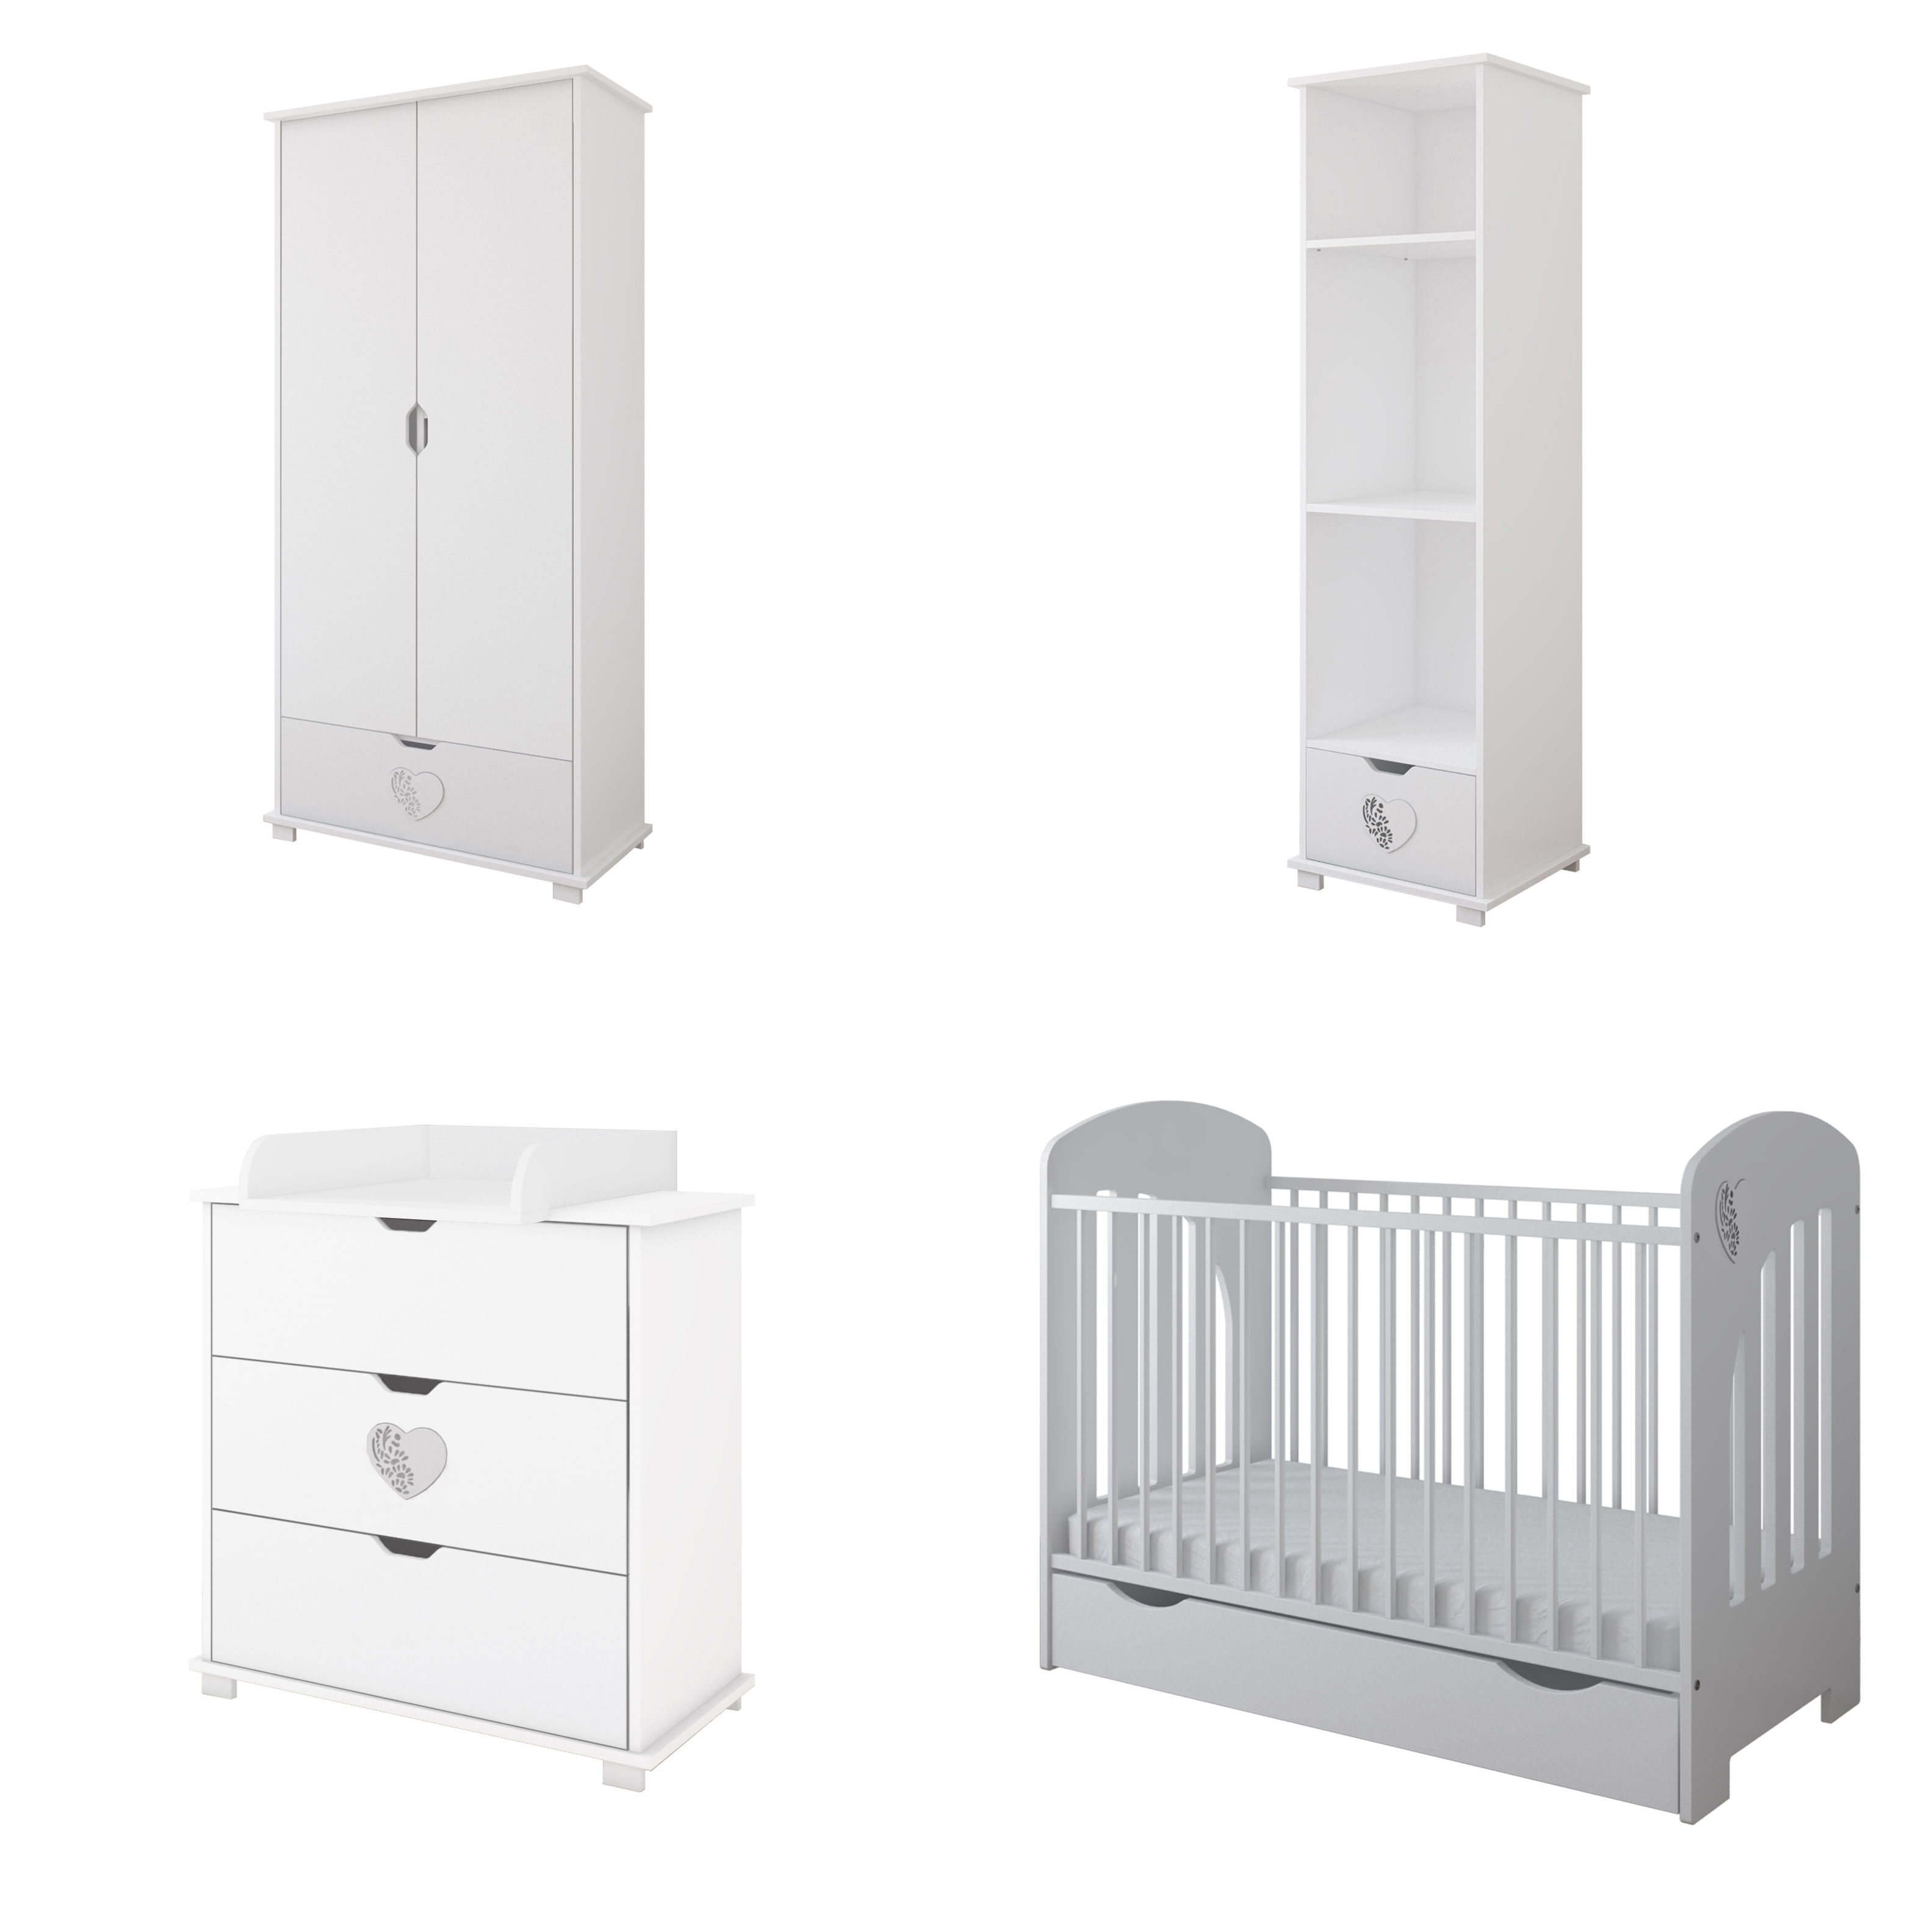 image - Just Baby Baby Cot Herz with Drawer and side bar 